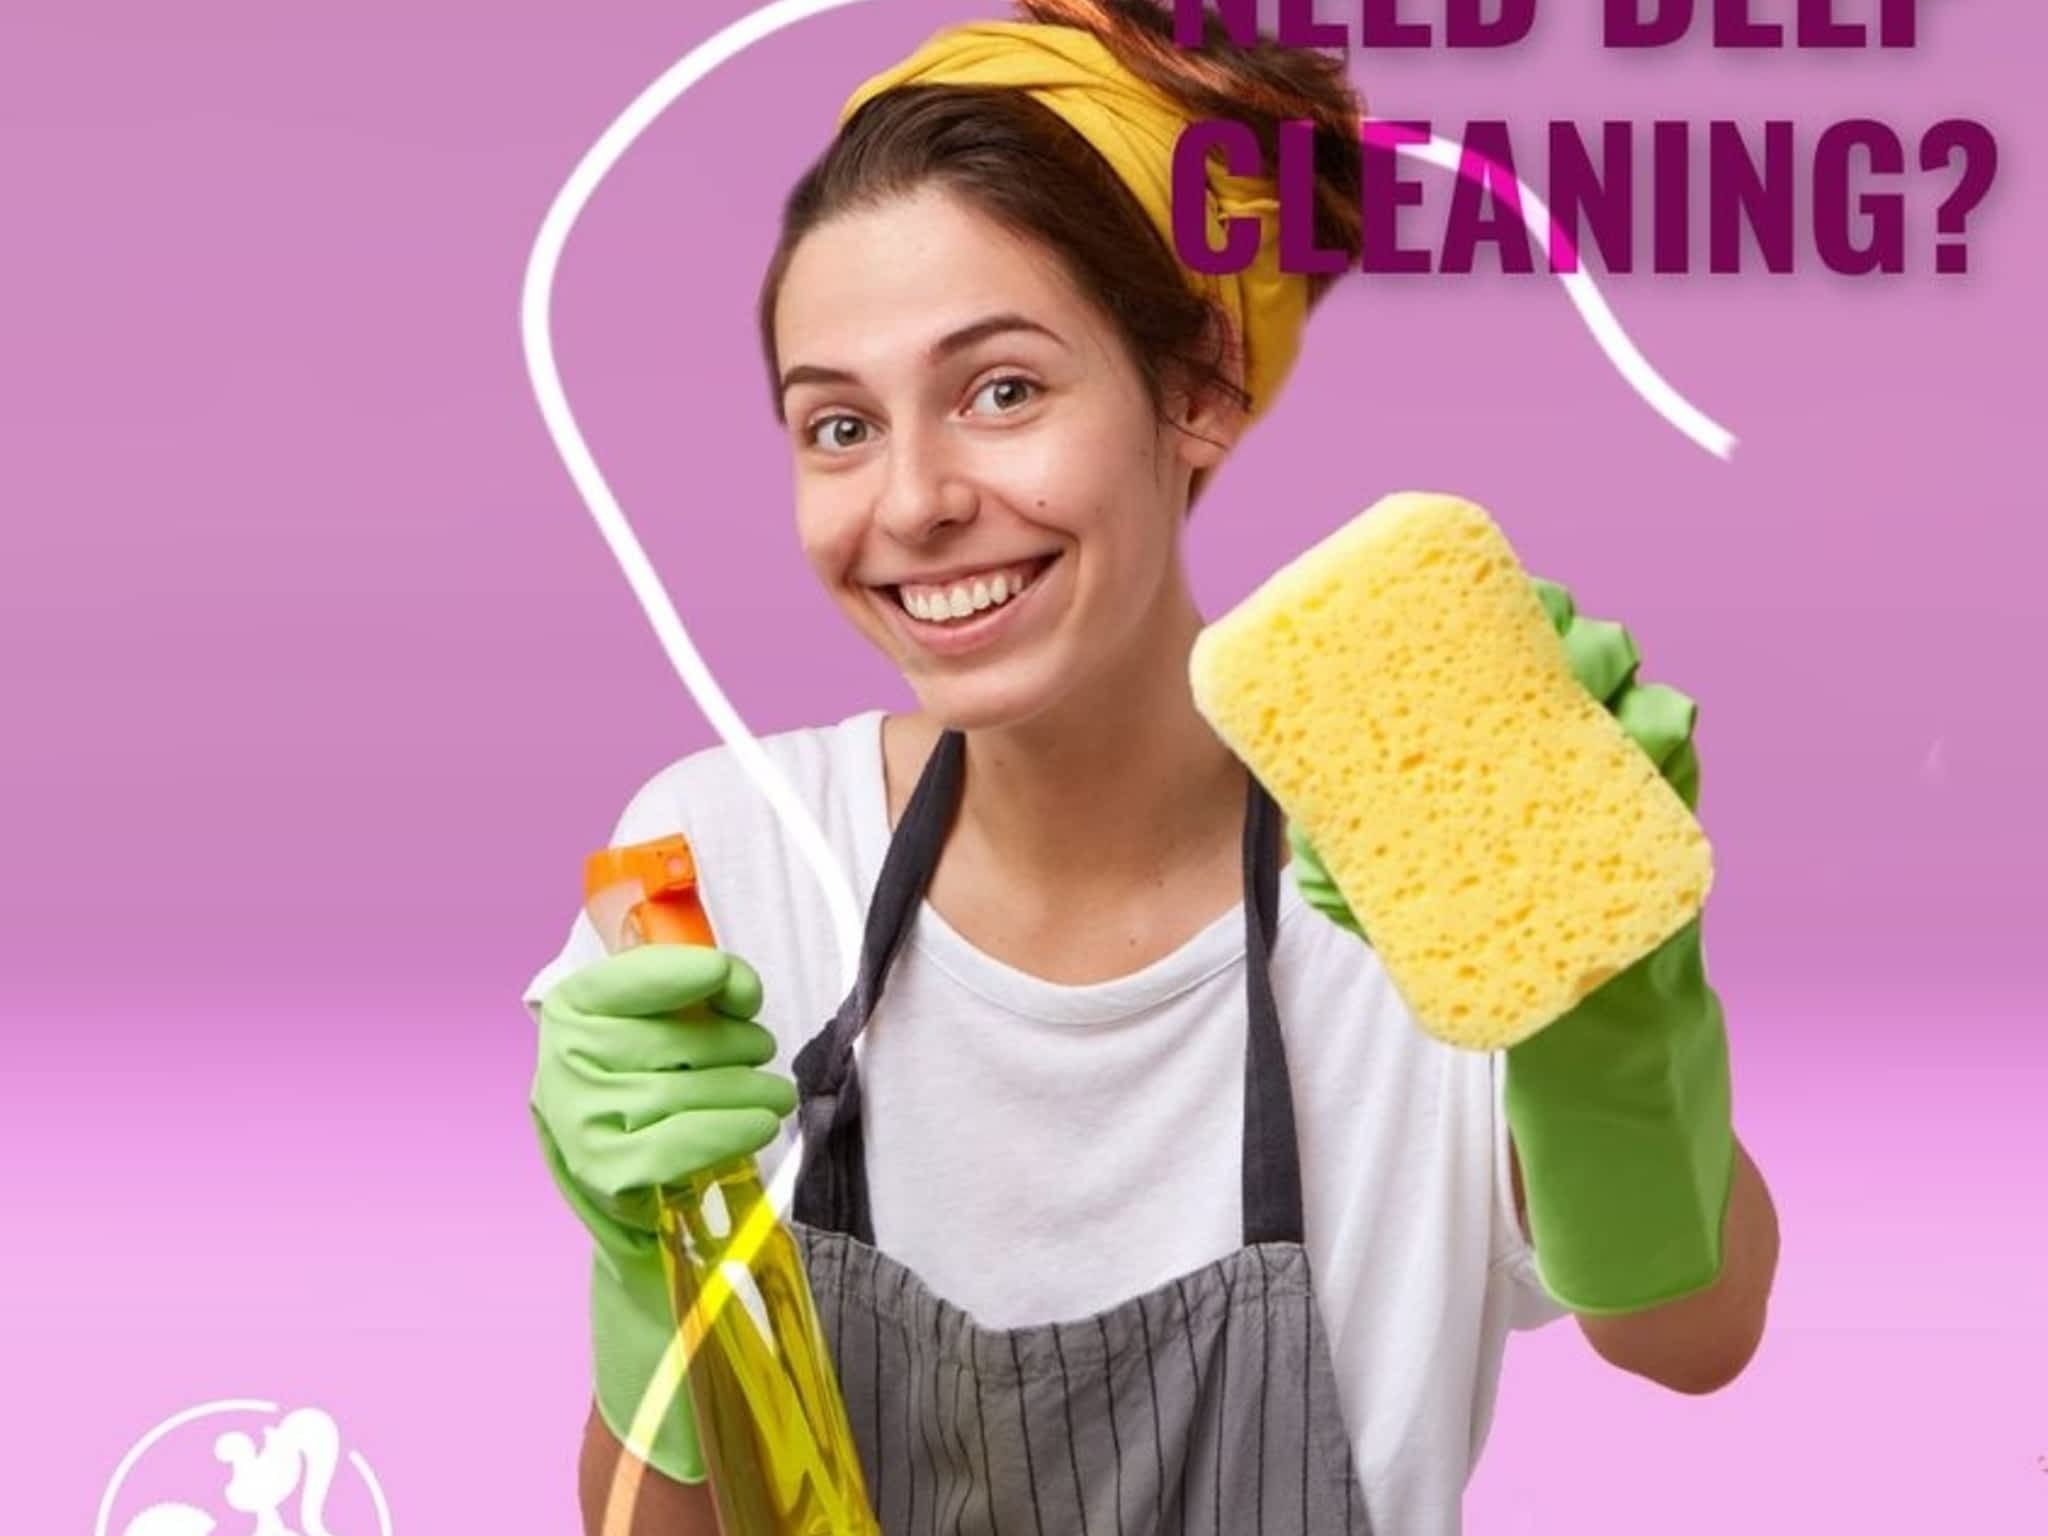 photo Smart Maid Residential & Commercial Cleaning Services